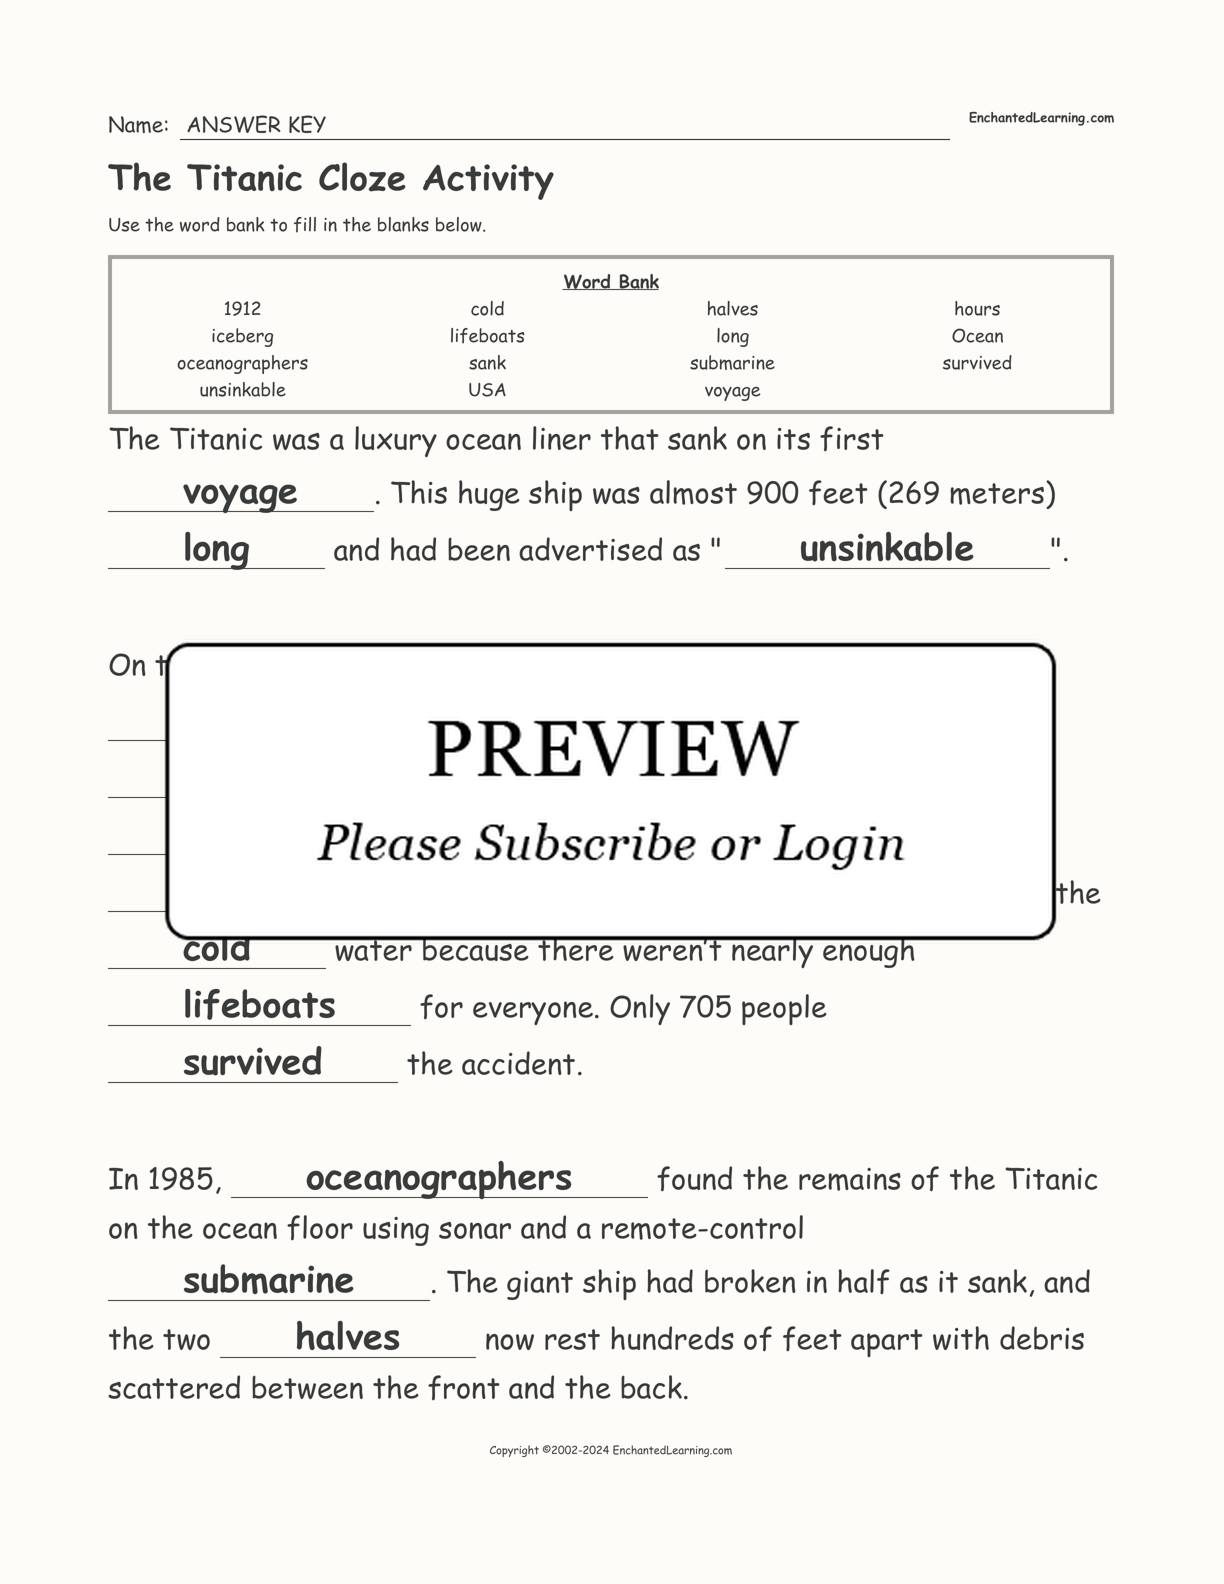 The Titanic Cloze Activity interactive worksheet page 2